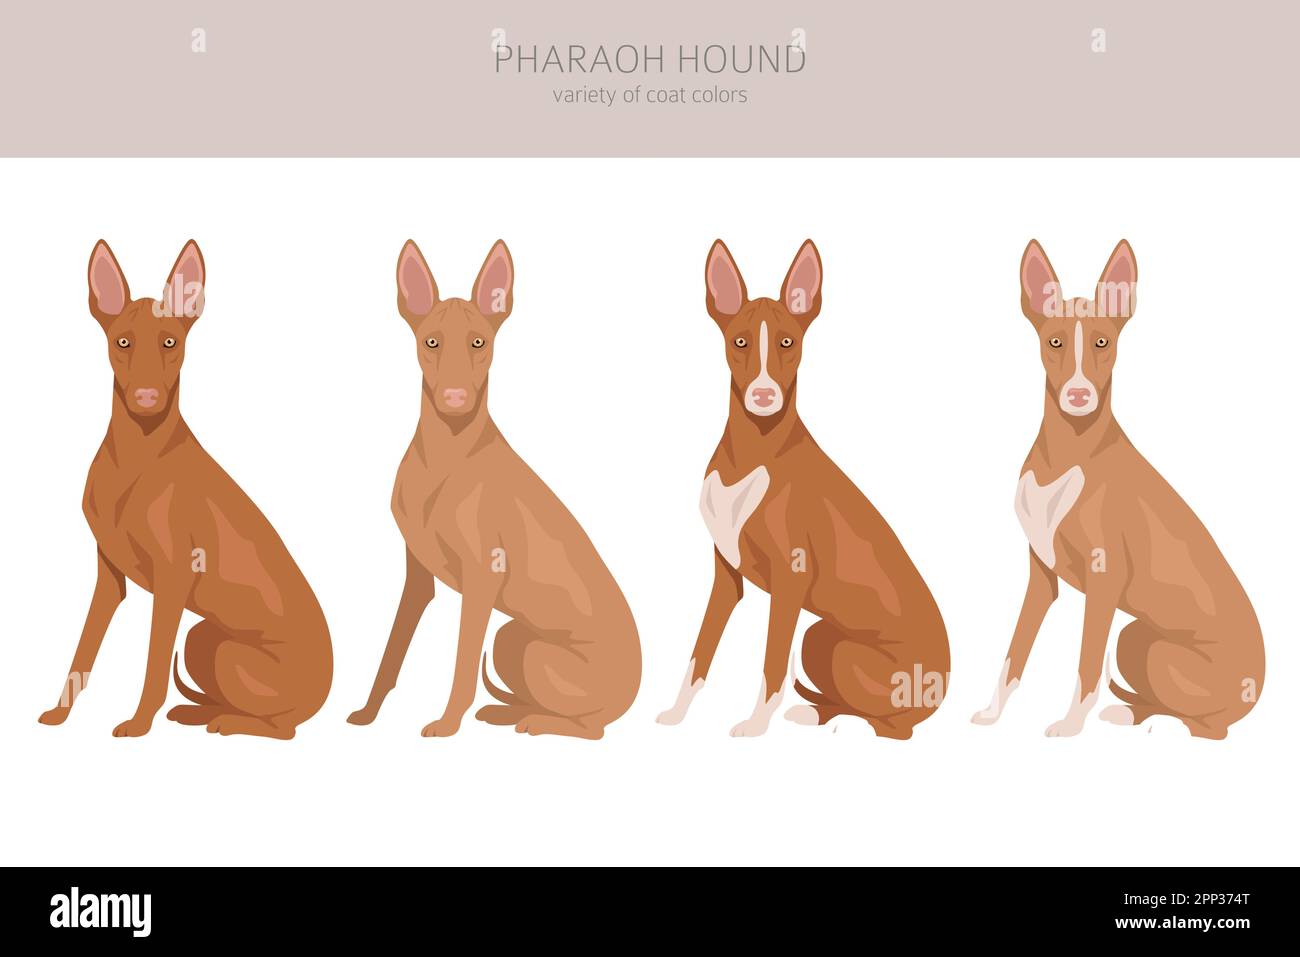 Pharaoh hound clipart. Different poses, coat colors set.  Vector illustration Stock Vector